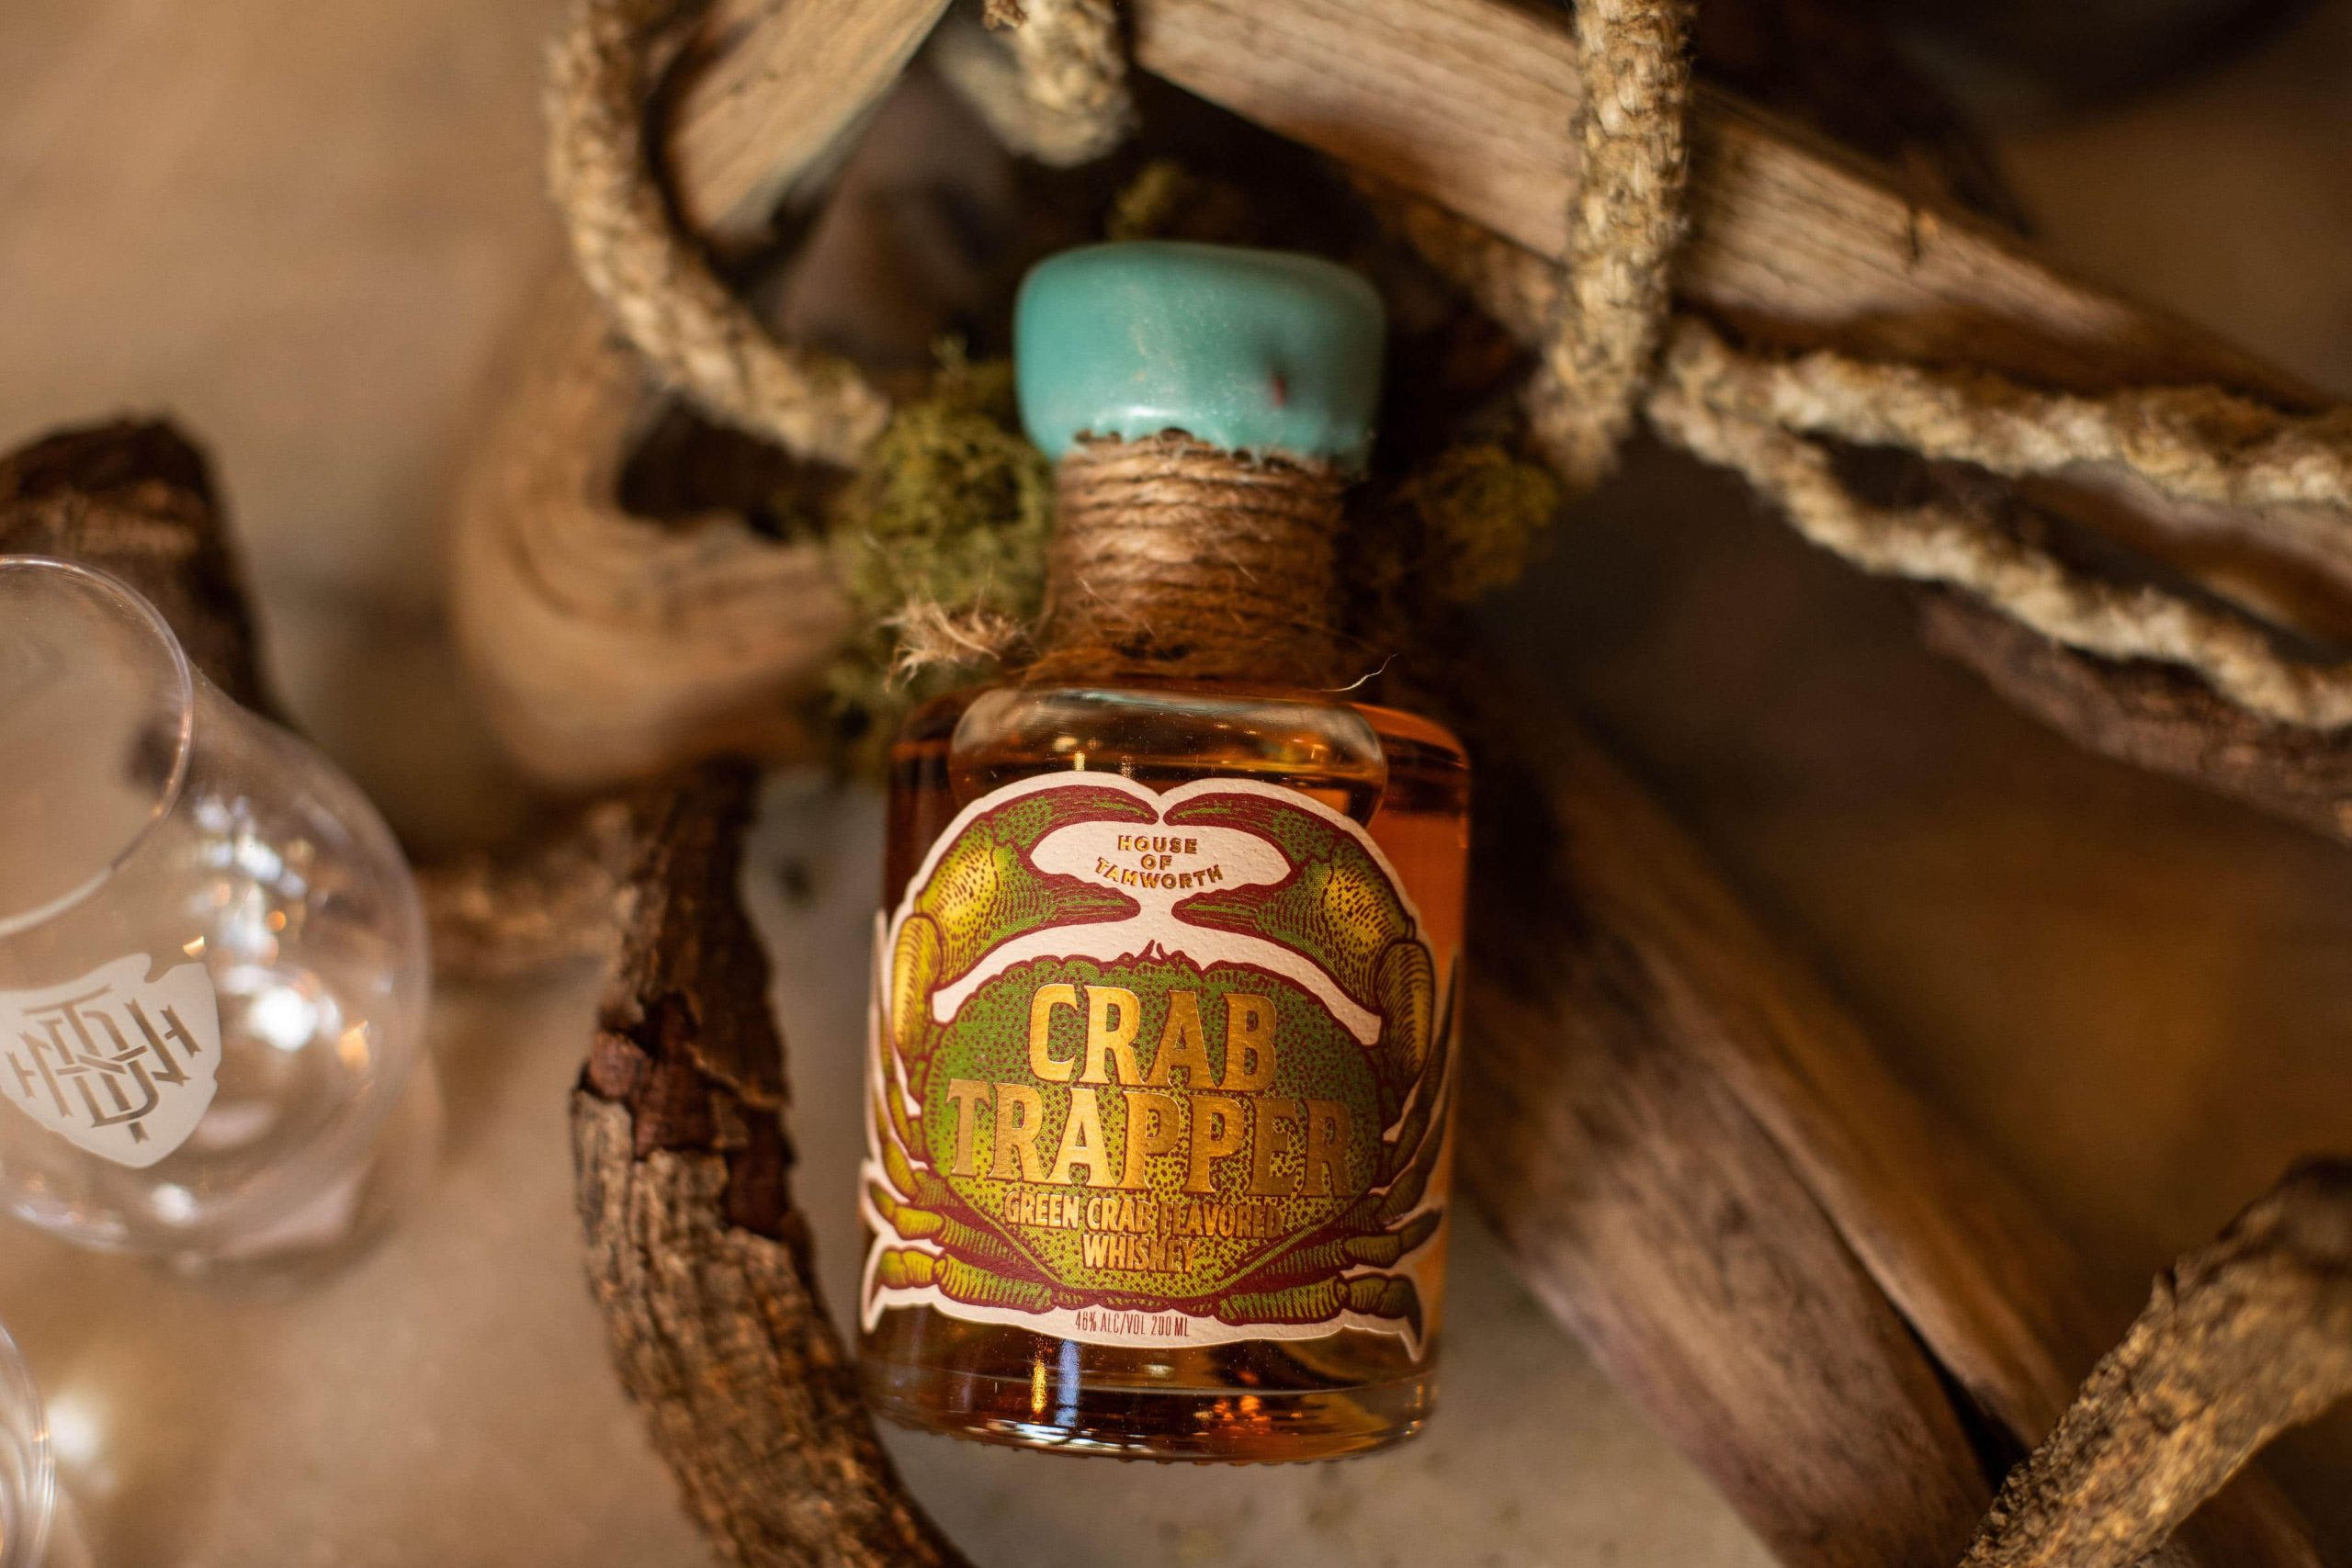 Crab Trapper Whiskey